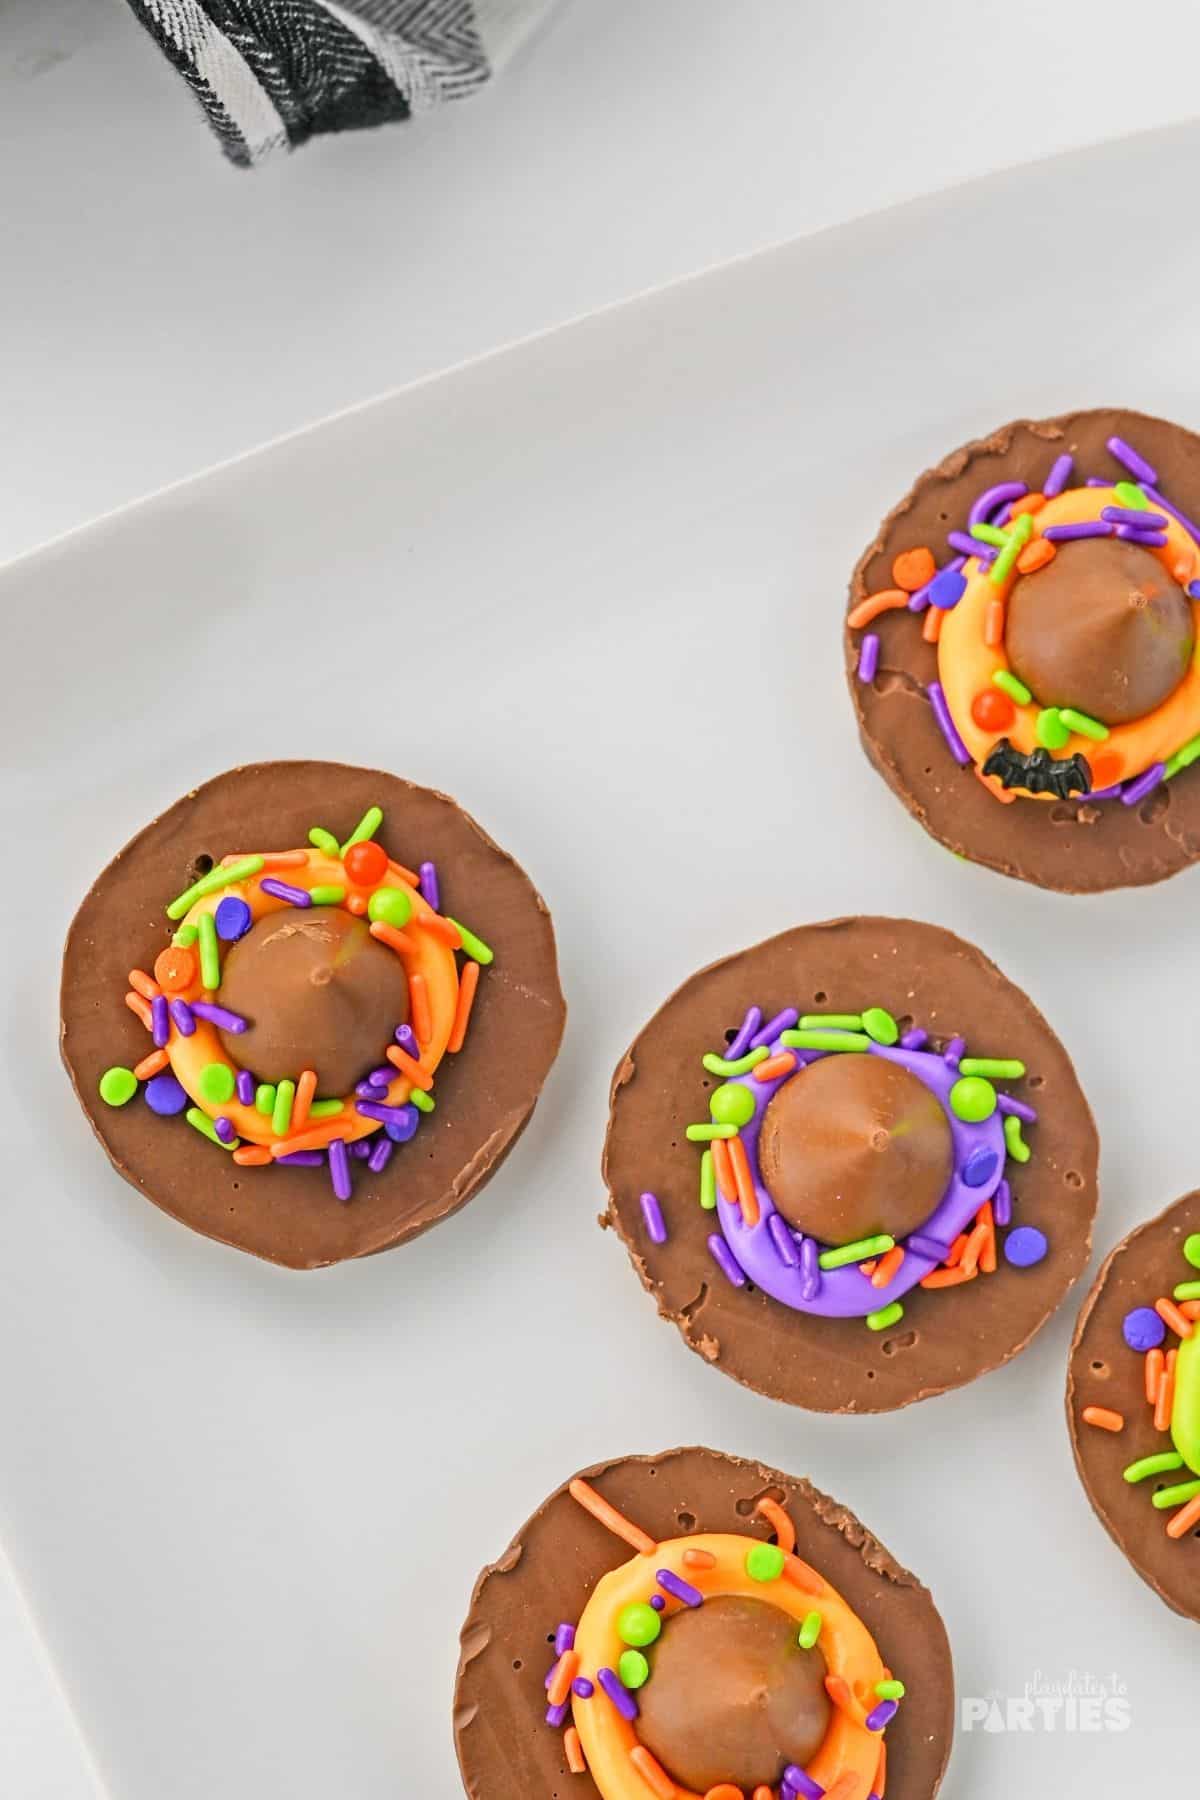 From above, you can see the Hershey's Kisses and colorful icing on top of fudge stripe cookies.